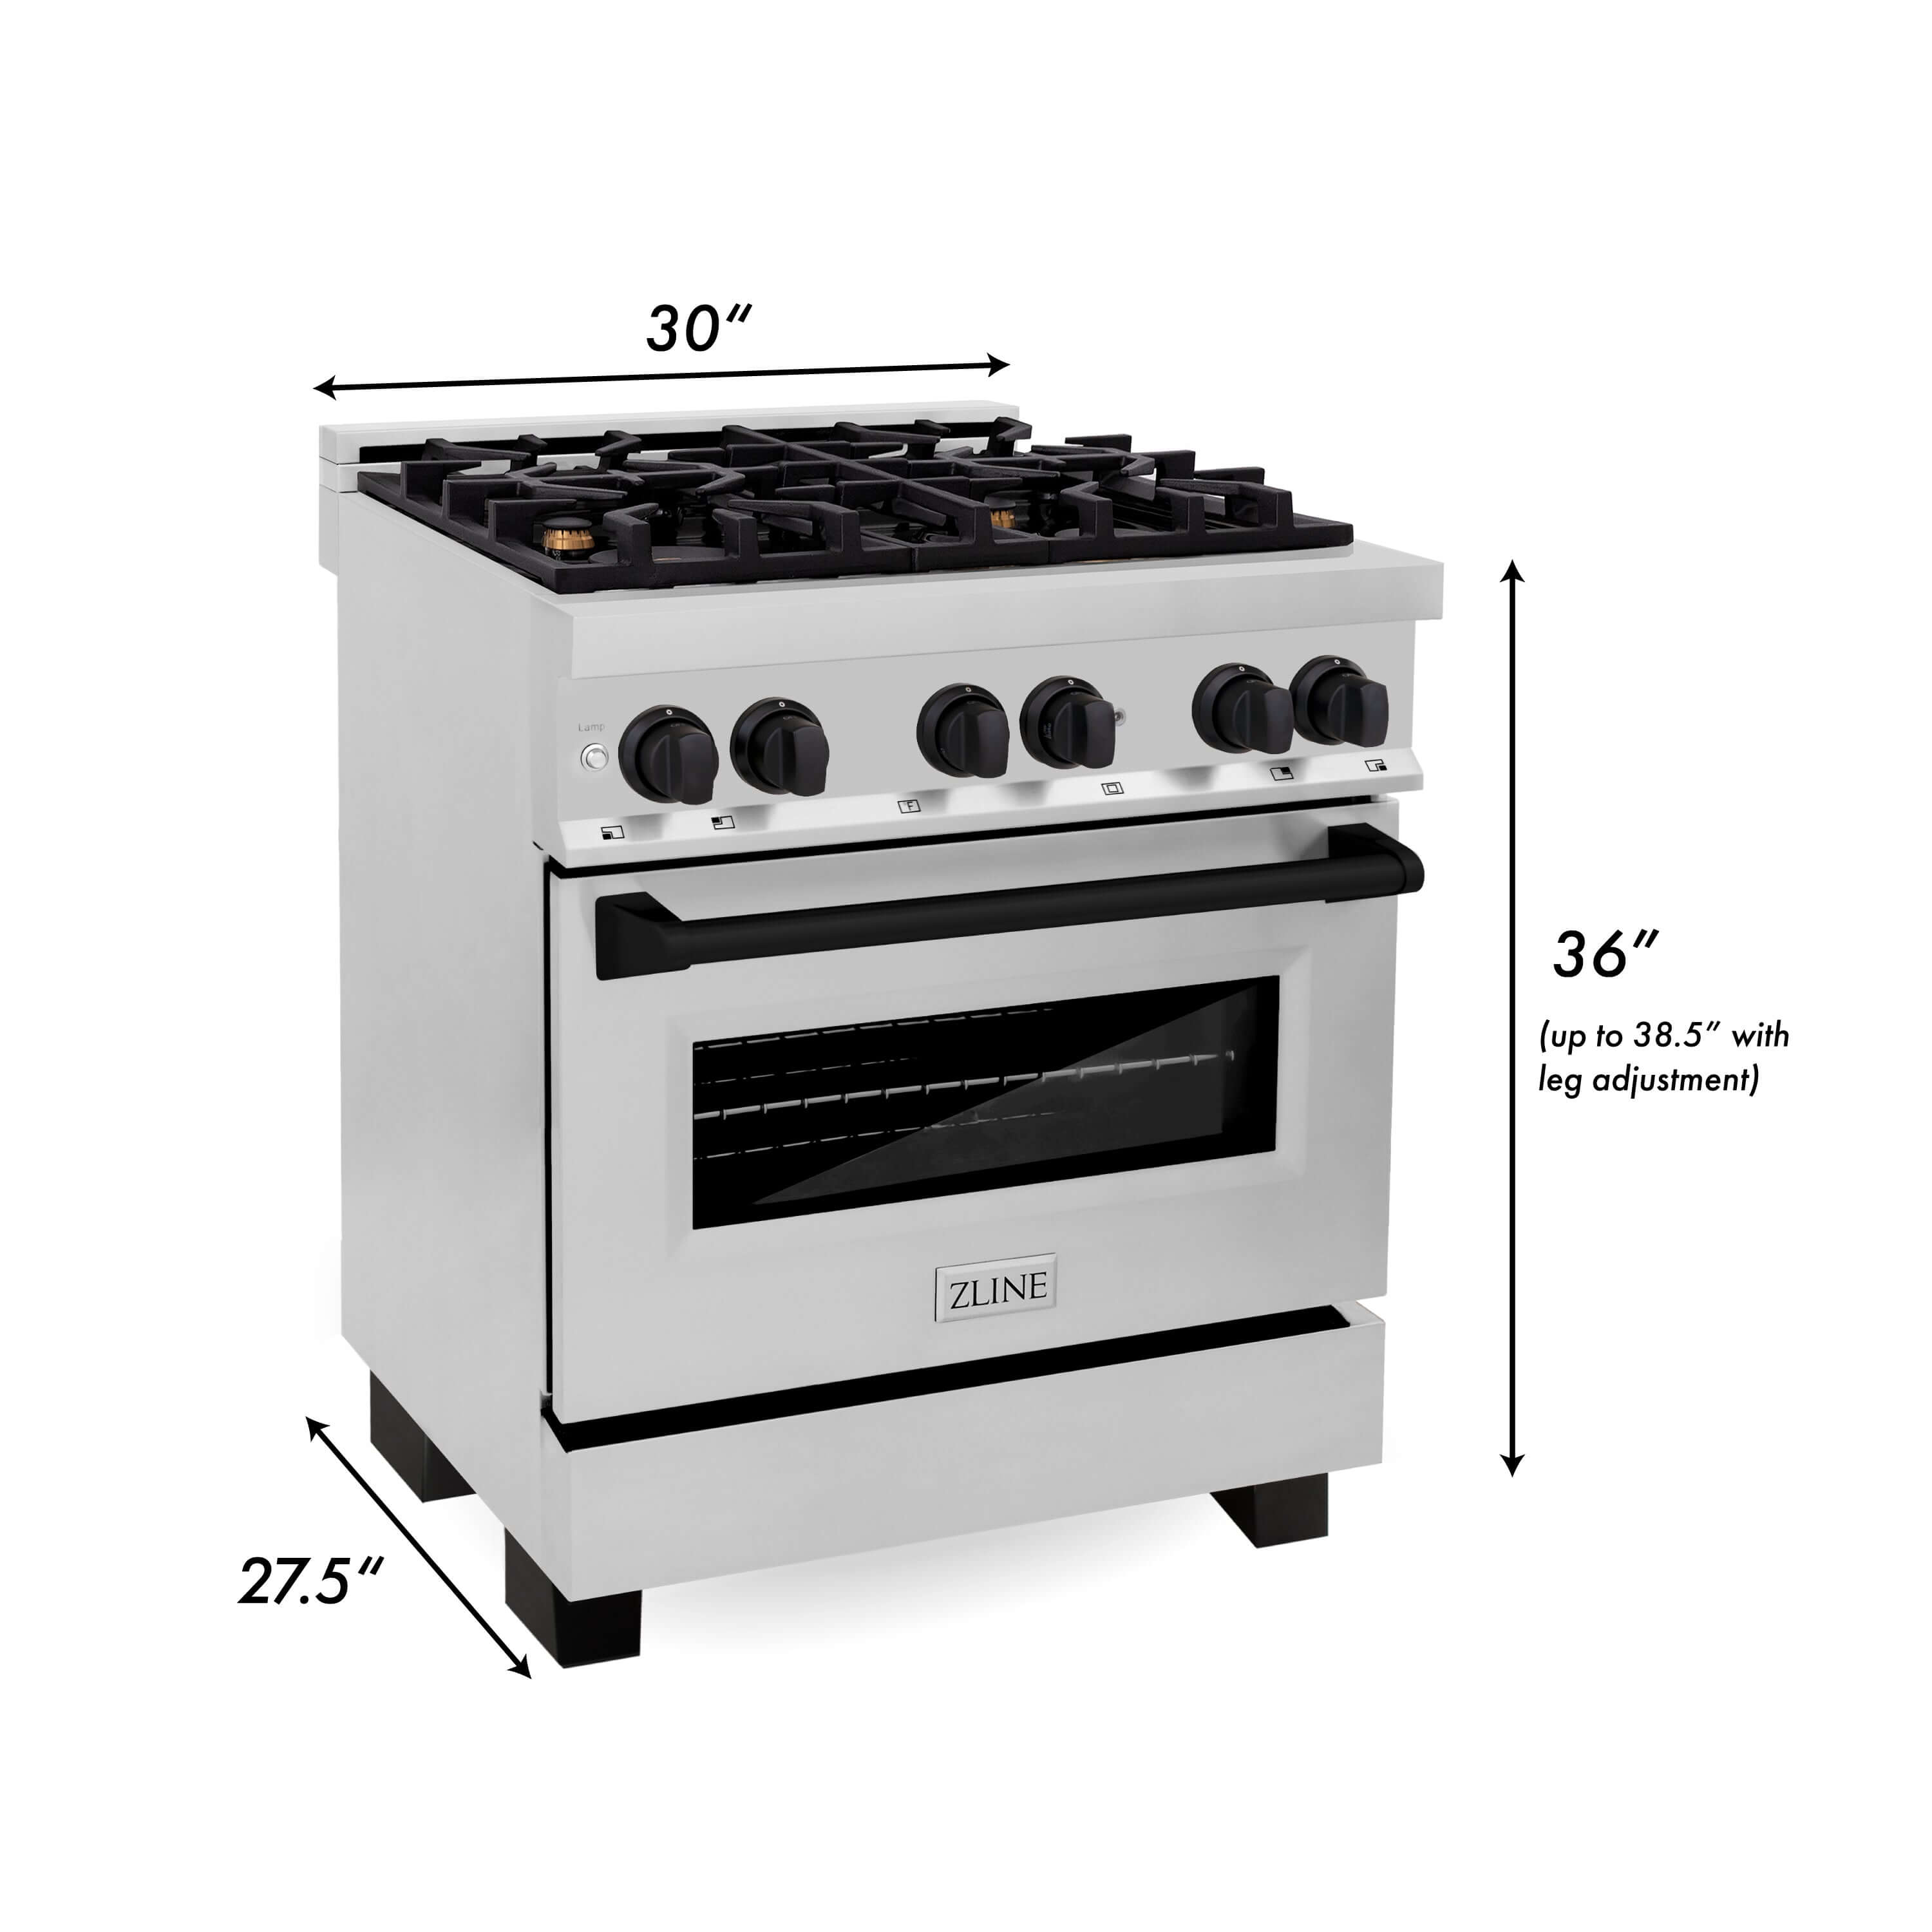 ZLINE Autograph Edition Kitchen Package in Stainless Steel with 30 in. Dual Fuel Range, 30 in. Range Hood, and 24 in. Dishwasher with Matte Black Accents (3AKP-RARHDWM30-MB) dimensional diagram with measurements.